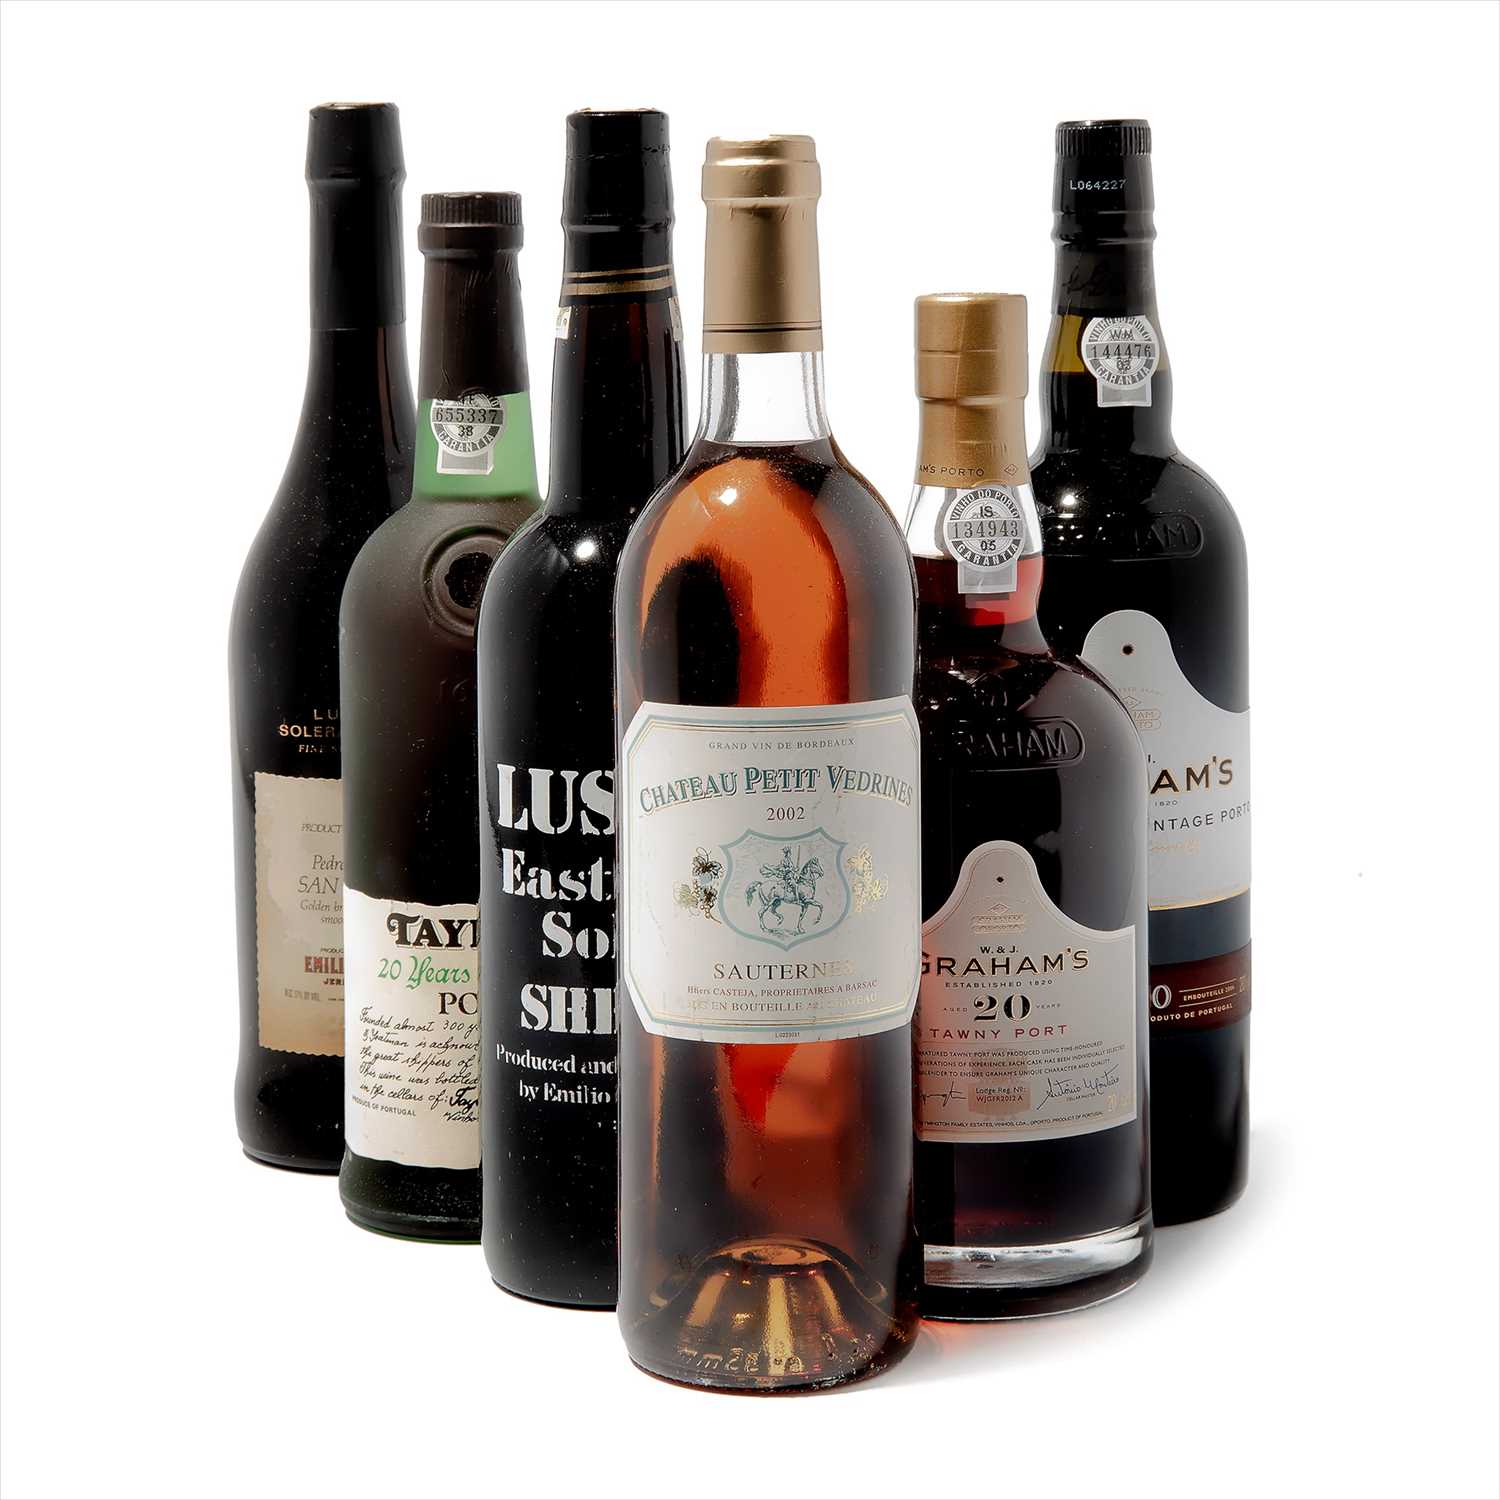 Lot 137 - 7 bottles Mixed Sauternes, Port and Sherry